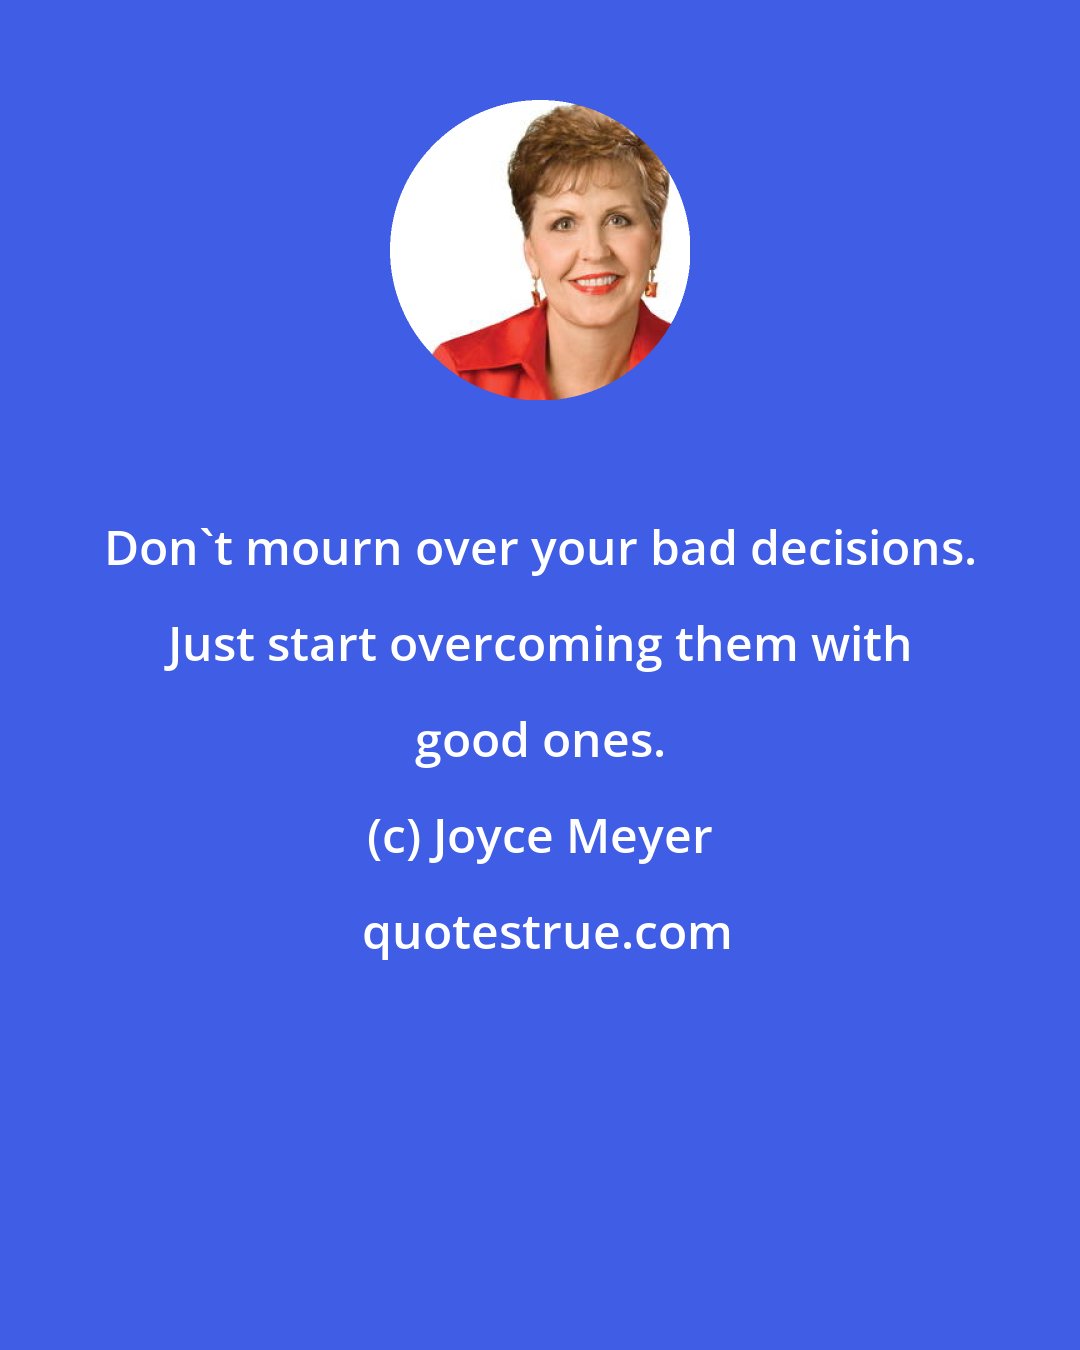 Joyce Meyer: Don't mourn over your bad decisions. Just start overcoming them with good ones.